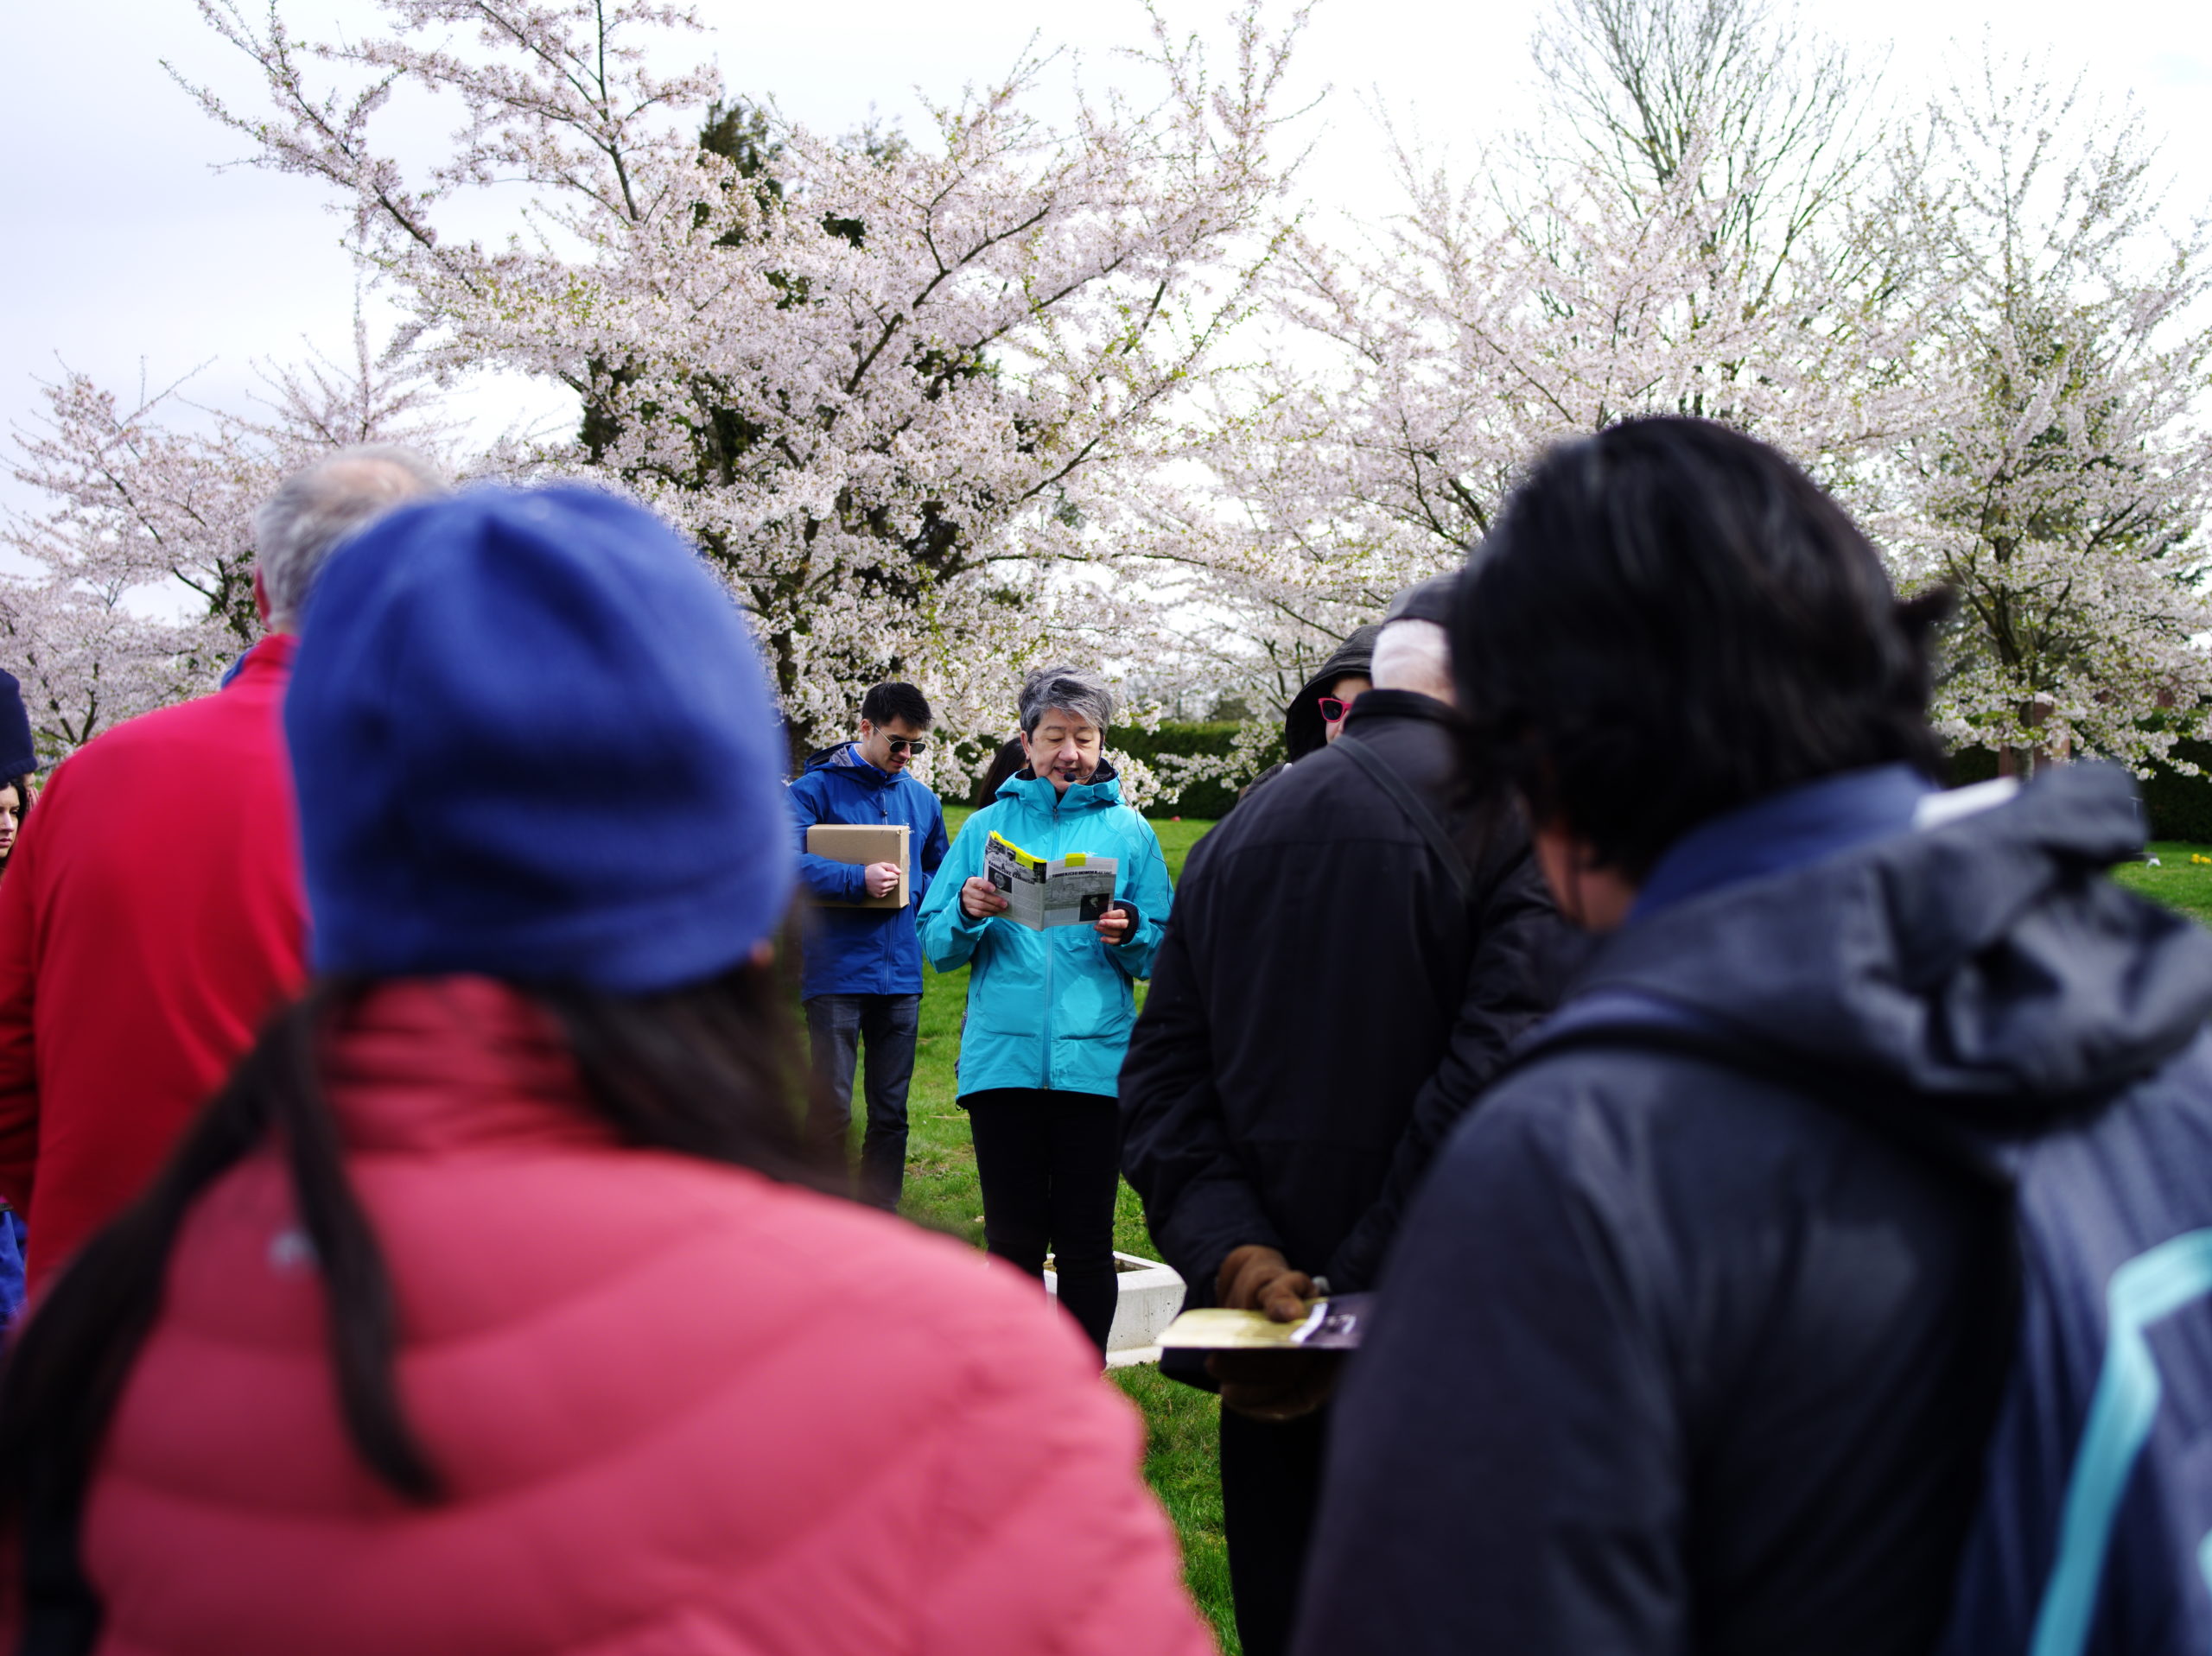 Image Description: A person with short grey hair stands in the center of a photograph reading from their notes. They are wearing a small headset microphone and a light blue jacket. They are surrounded by a group of people who are paying attention to them intently. There are blossoming cherry blossom tree branches all across the background of the photograph.